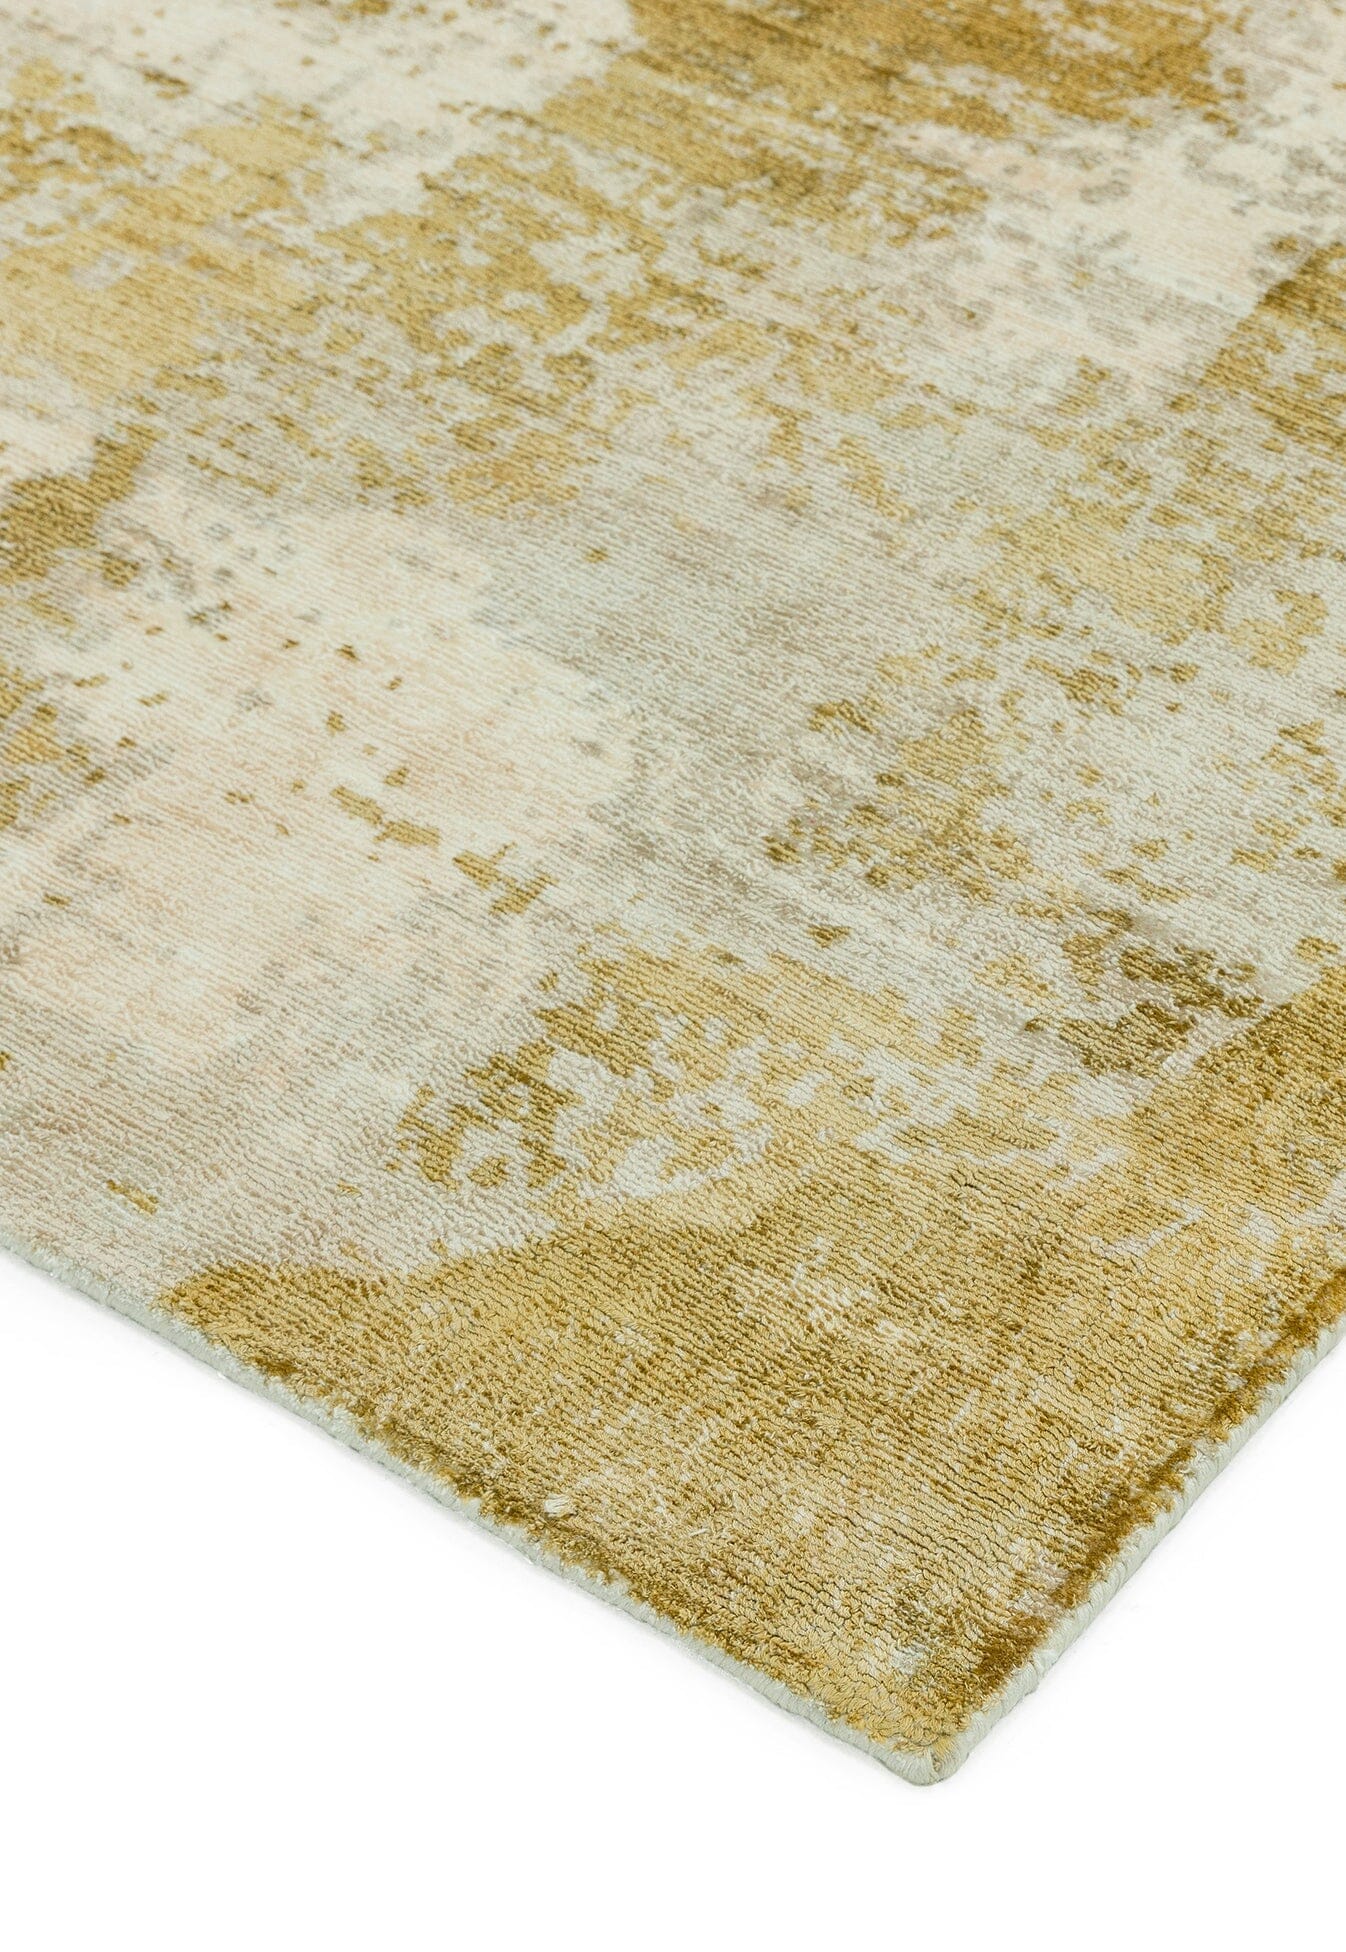  Asiatic Carpets-Asiatic Carpets Gatsby Hand Woven Rug Autumn - 160 x 230cm-Yellow, Gold 533 